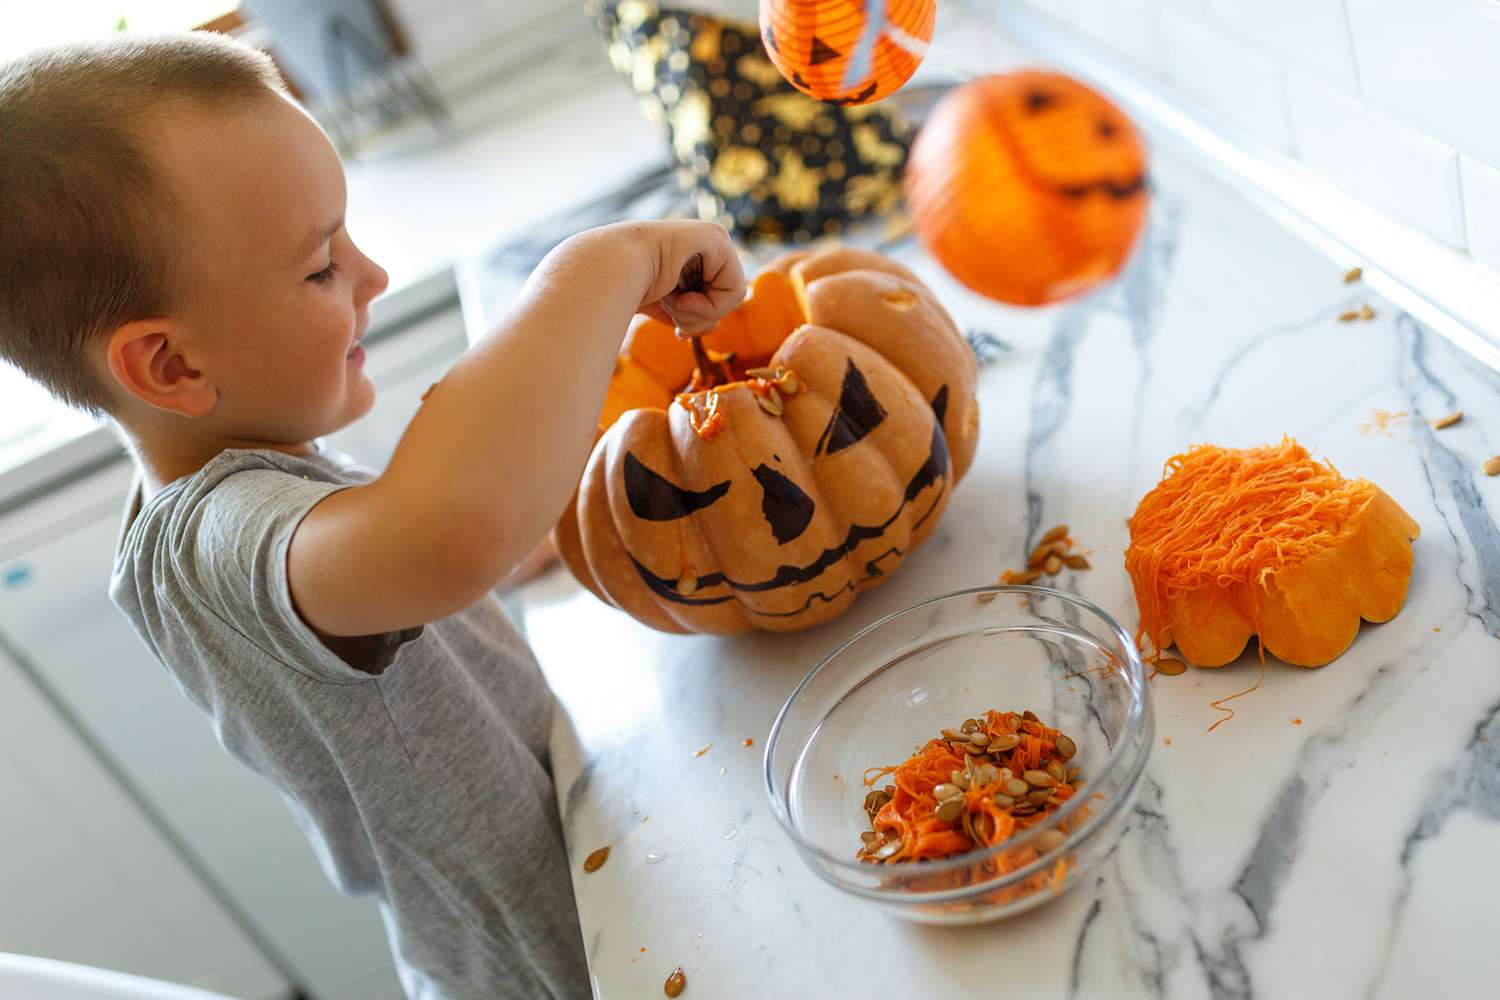 child scooping out pumpkin seeds and insides from a fresh pumpkin with jakc-o-lantern markings on a kitchen counter